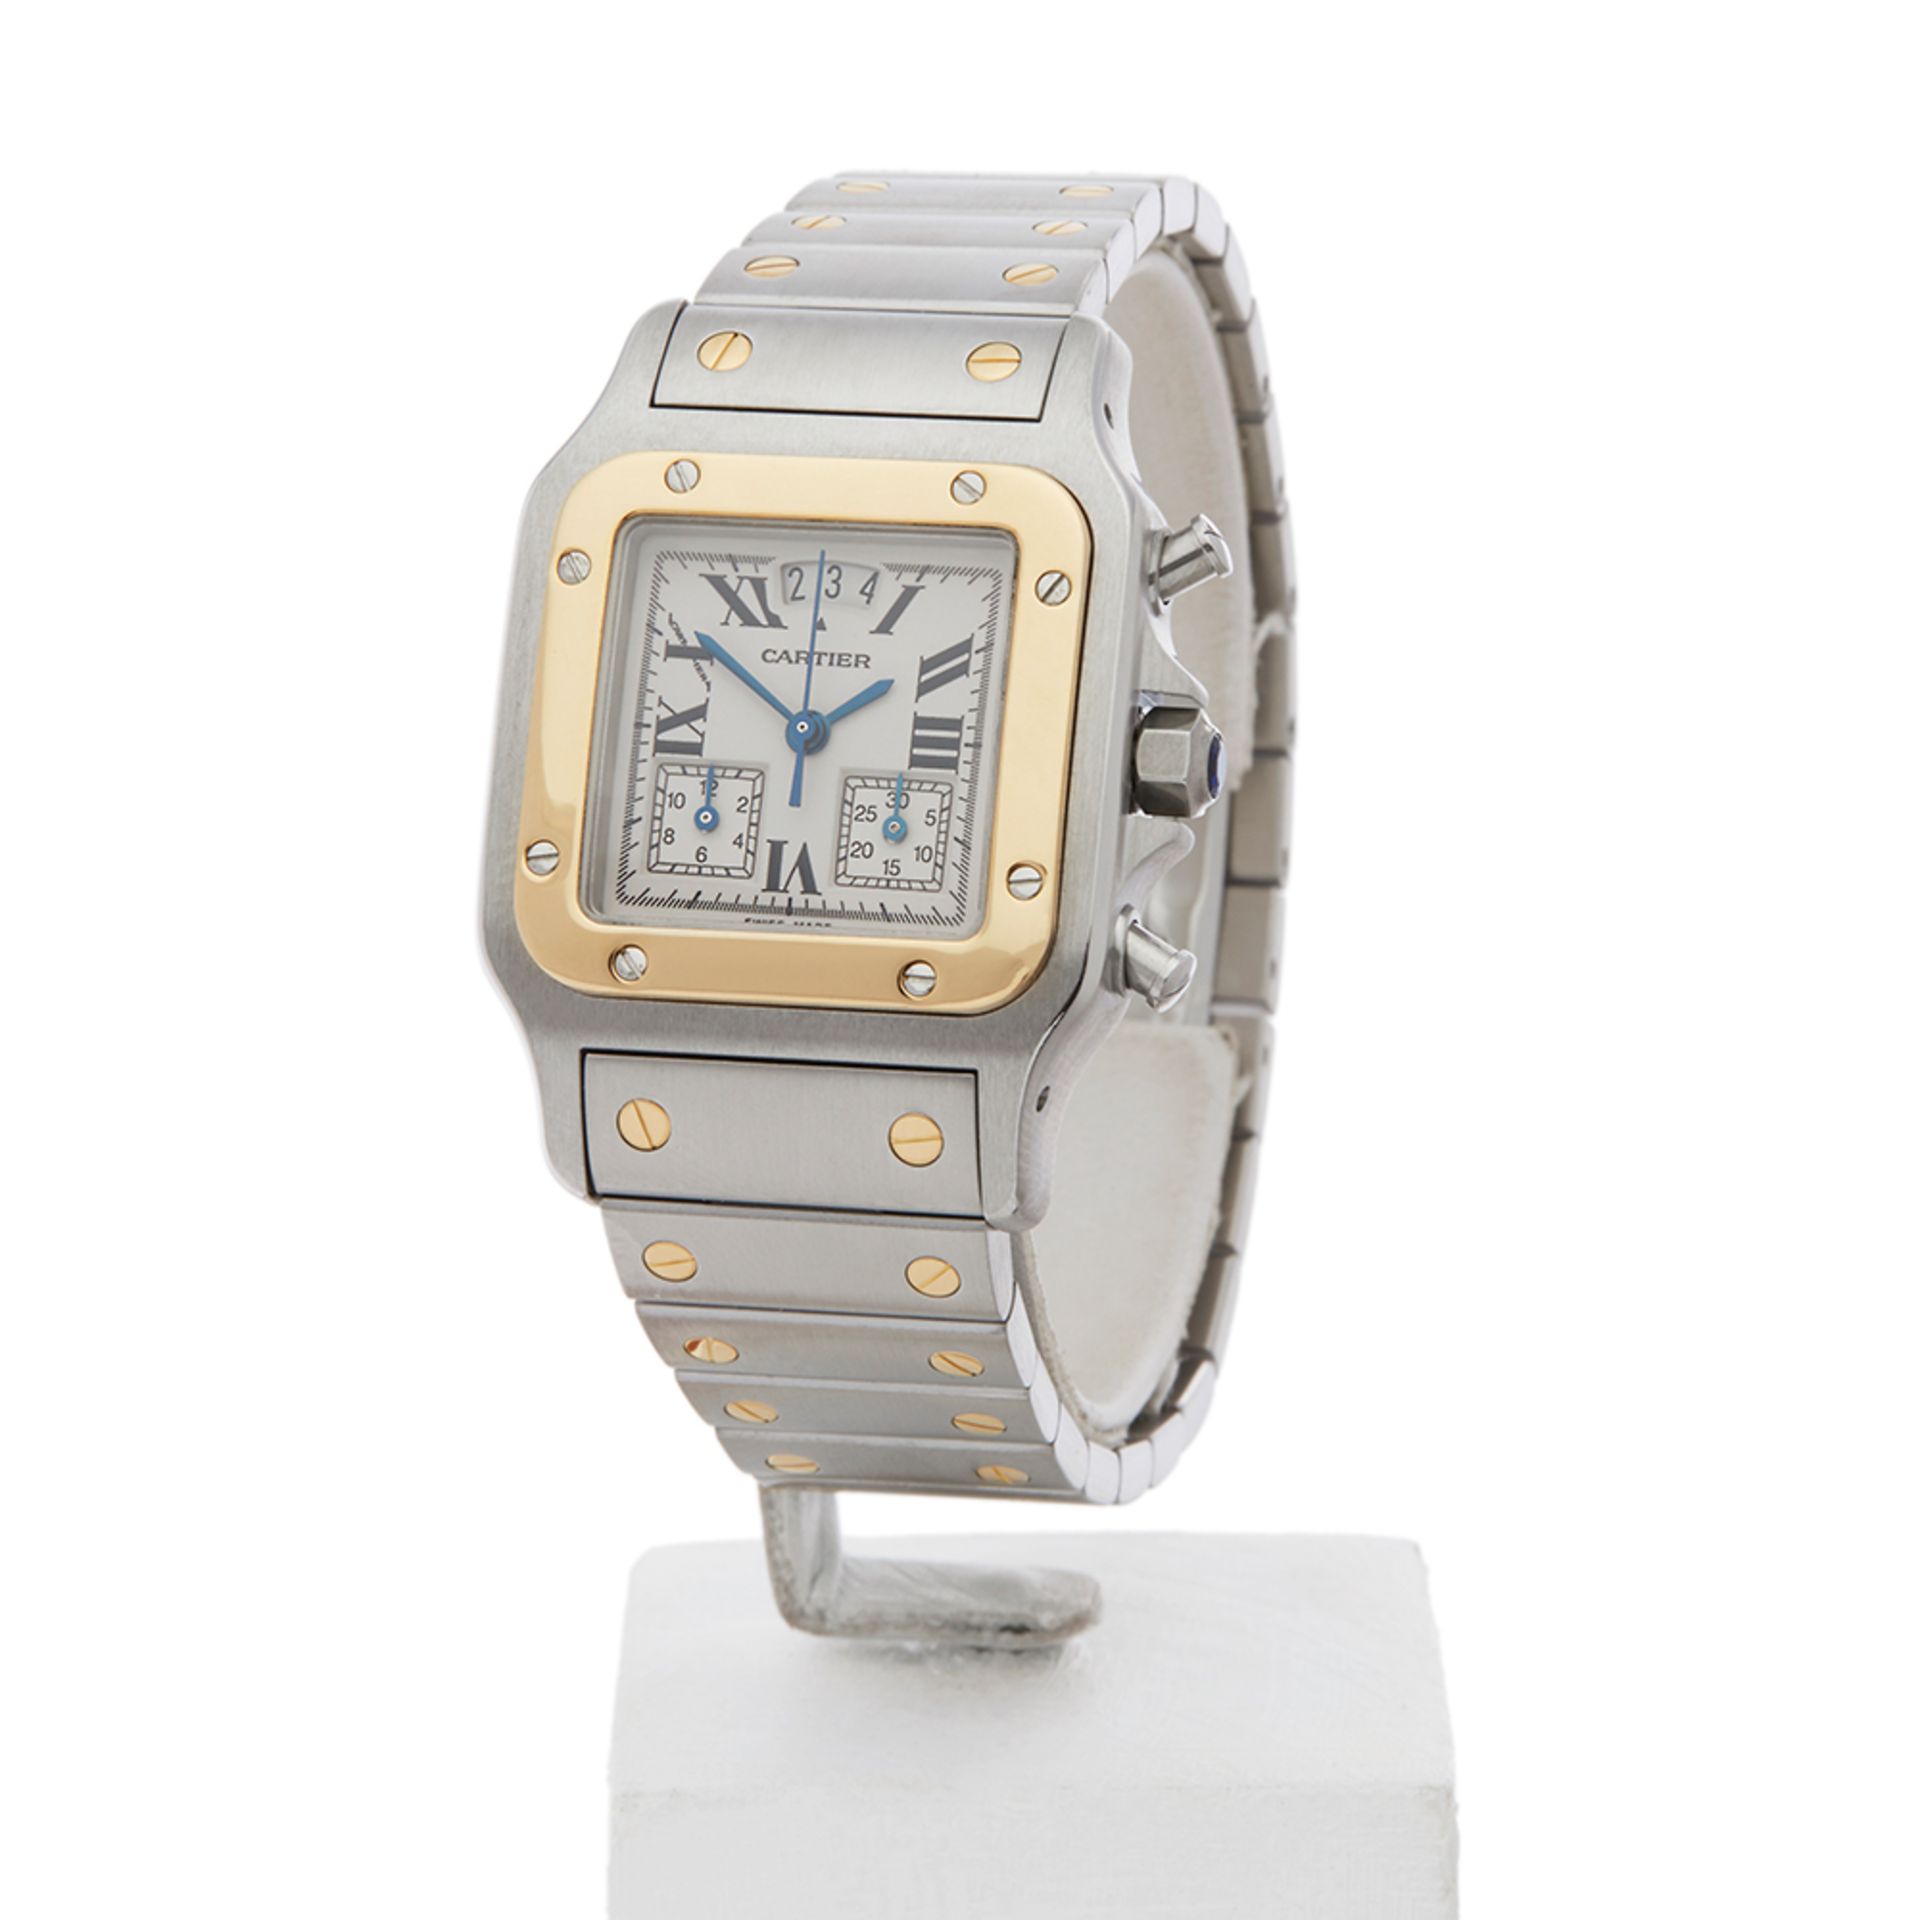 Cartier Santos Galbee Chronograph 30mm Stainless Steel & 18k Yellow Gold - 2425 or W20042C4 - Image 3 of 8